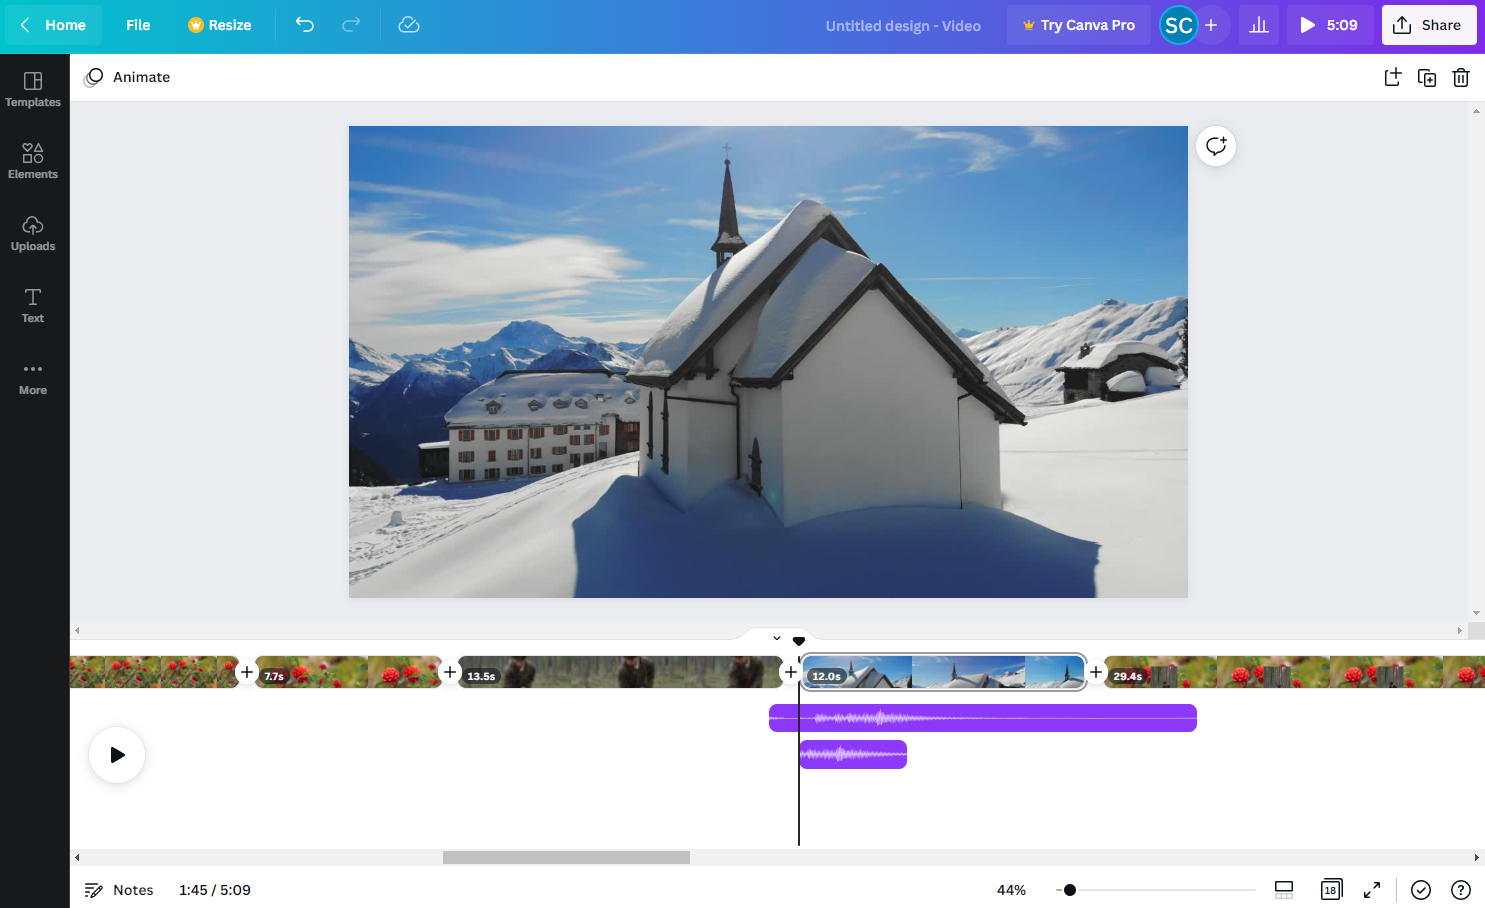 Canva Video's interface is simple to navigate